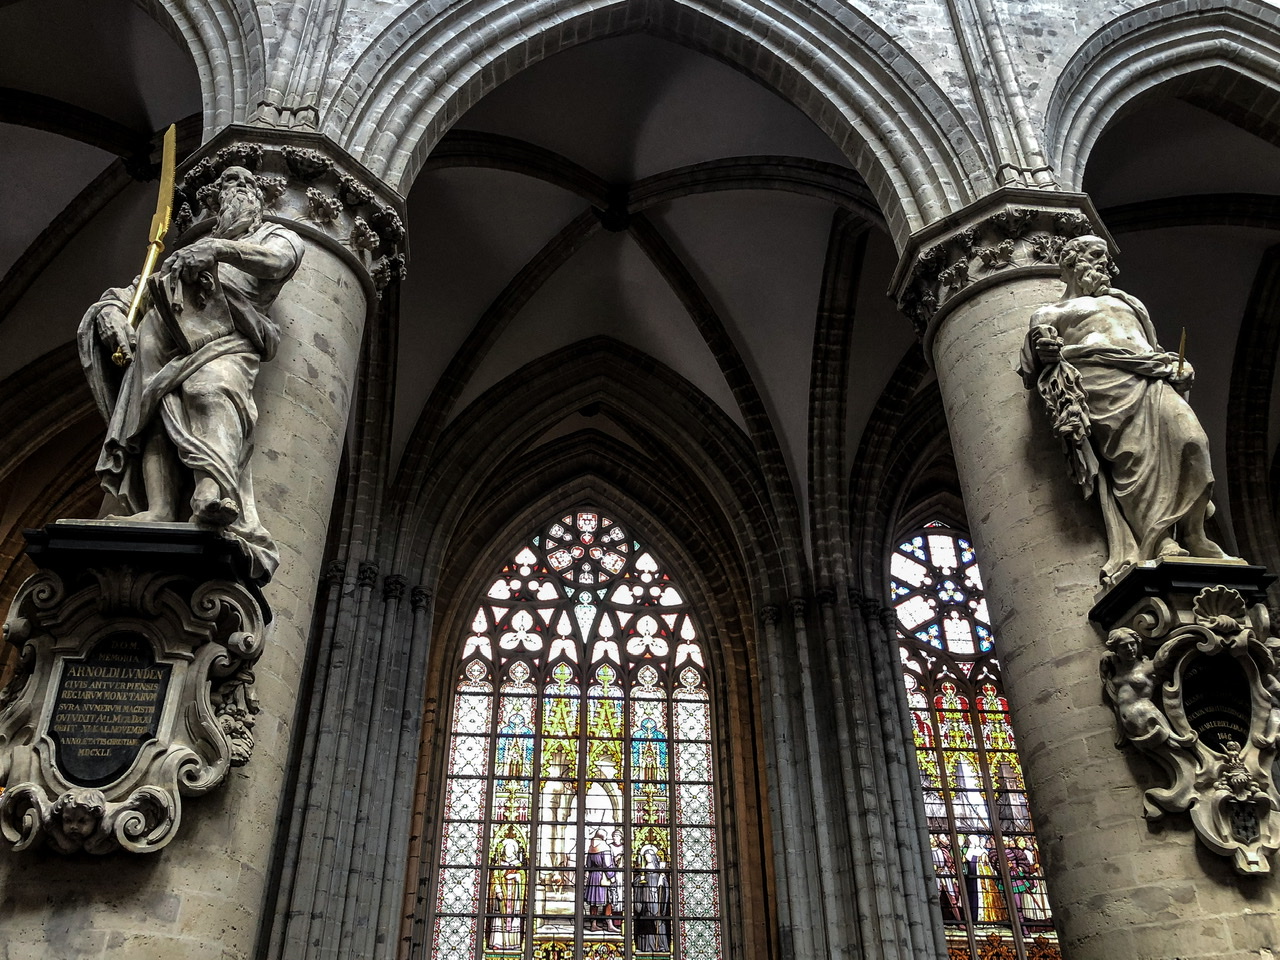 Two statues of apostles on pillars with a stained glass window between inside St Michael and St Gudula Cathedral in Brussels